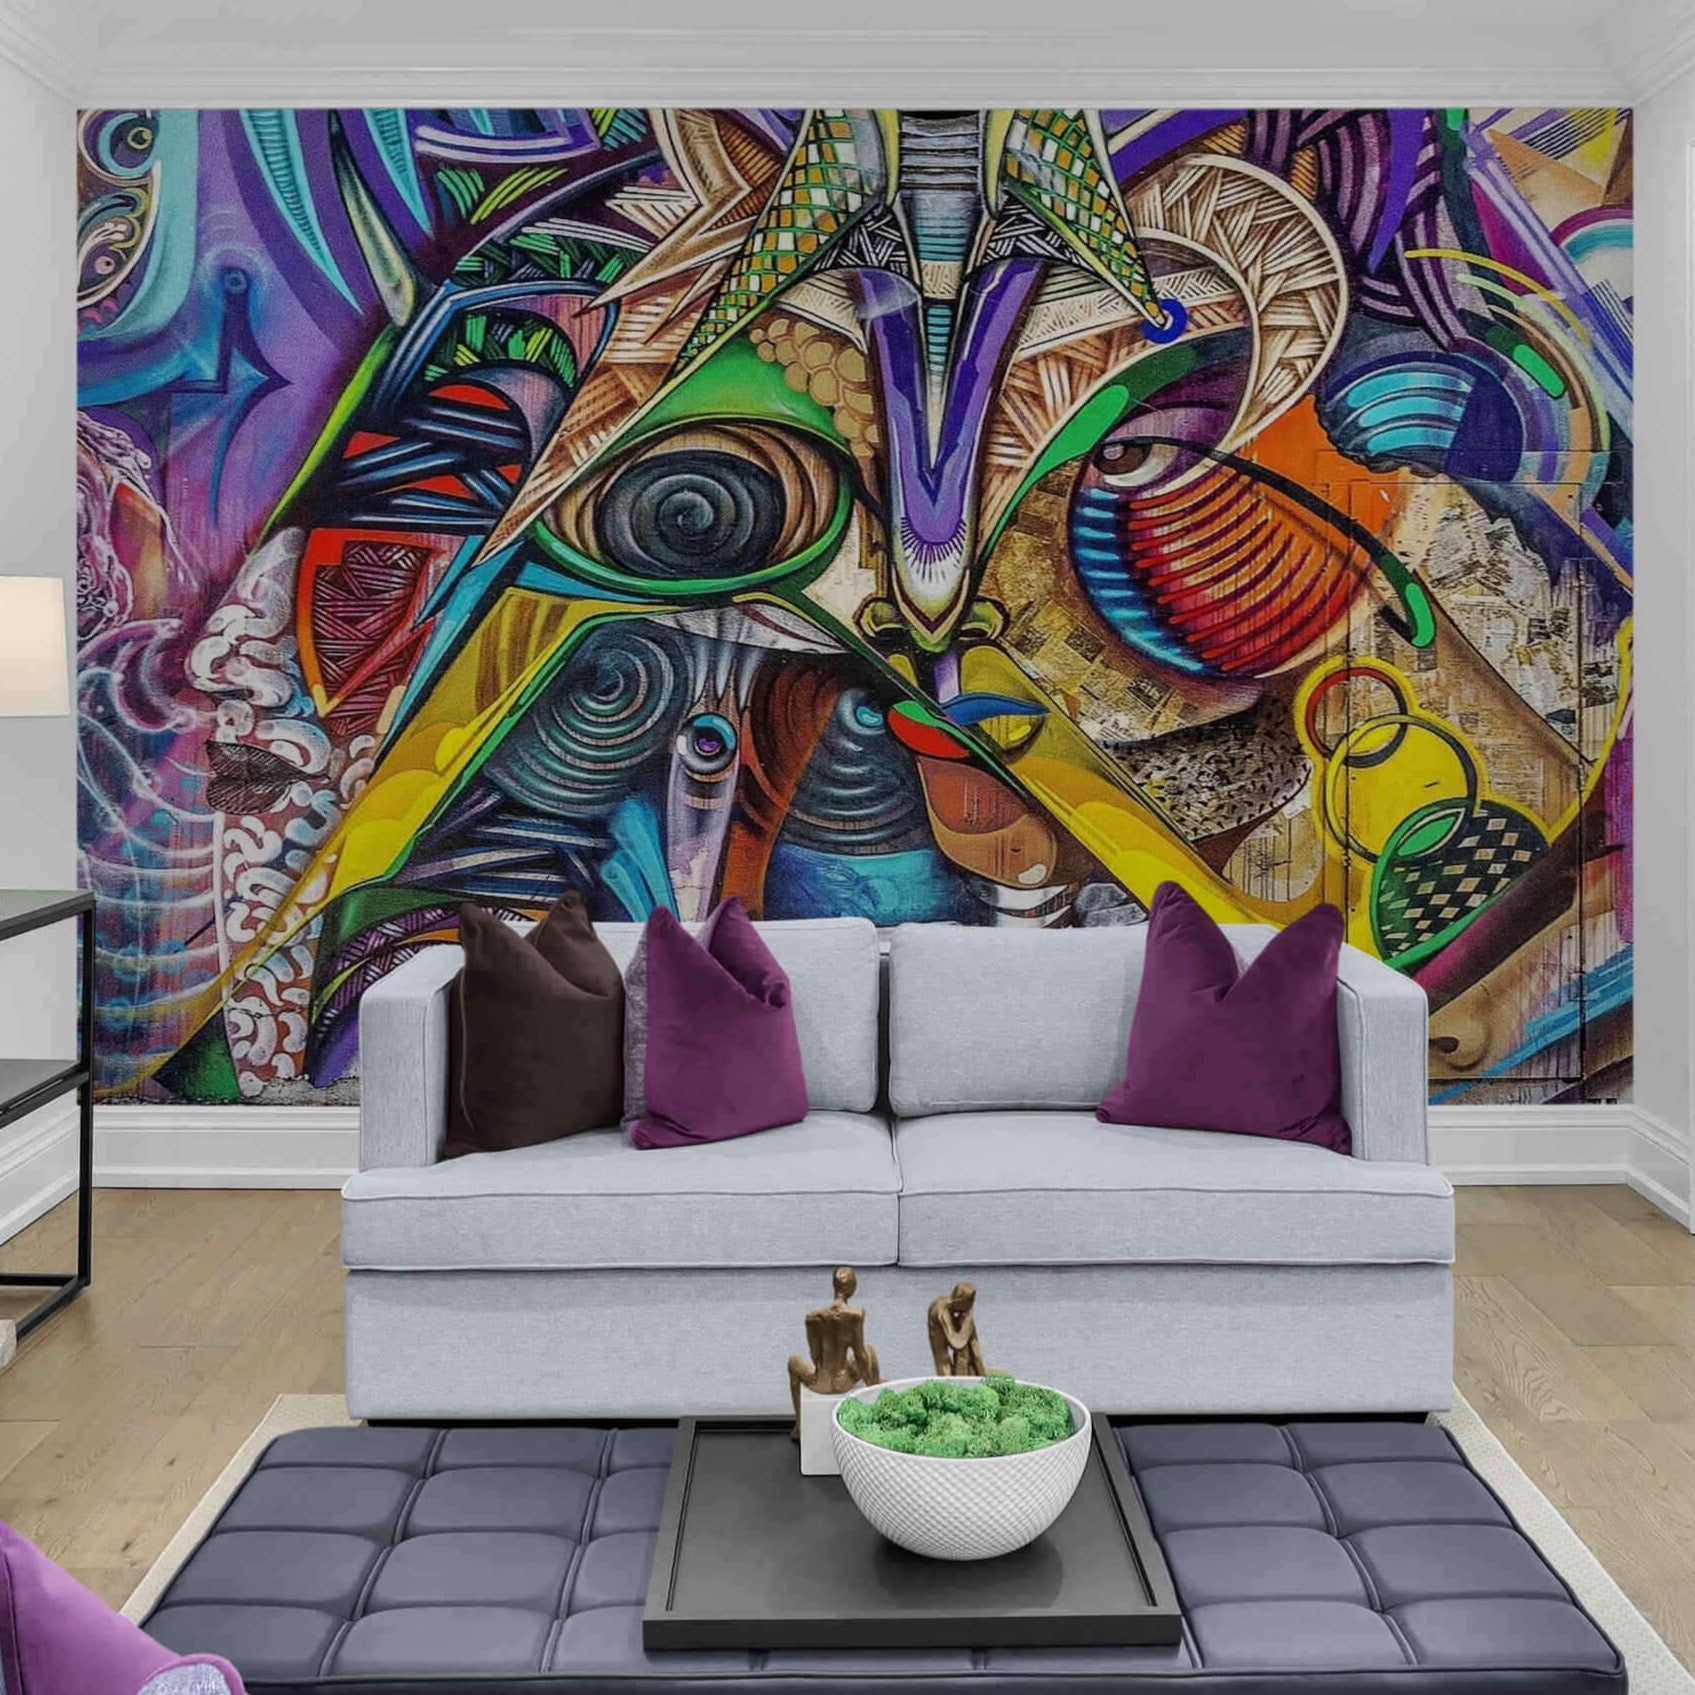 Your custom vision brought to life with a personalized graffiti wall mural.